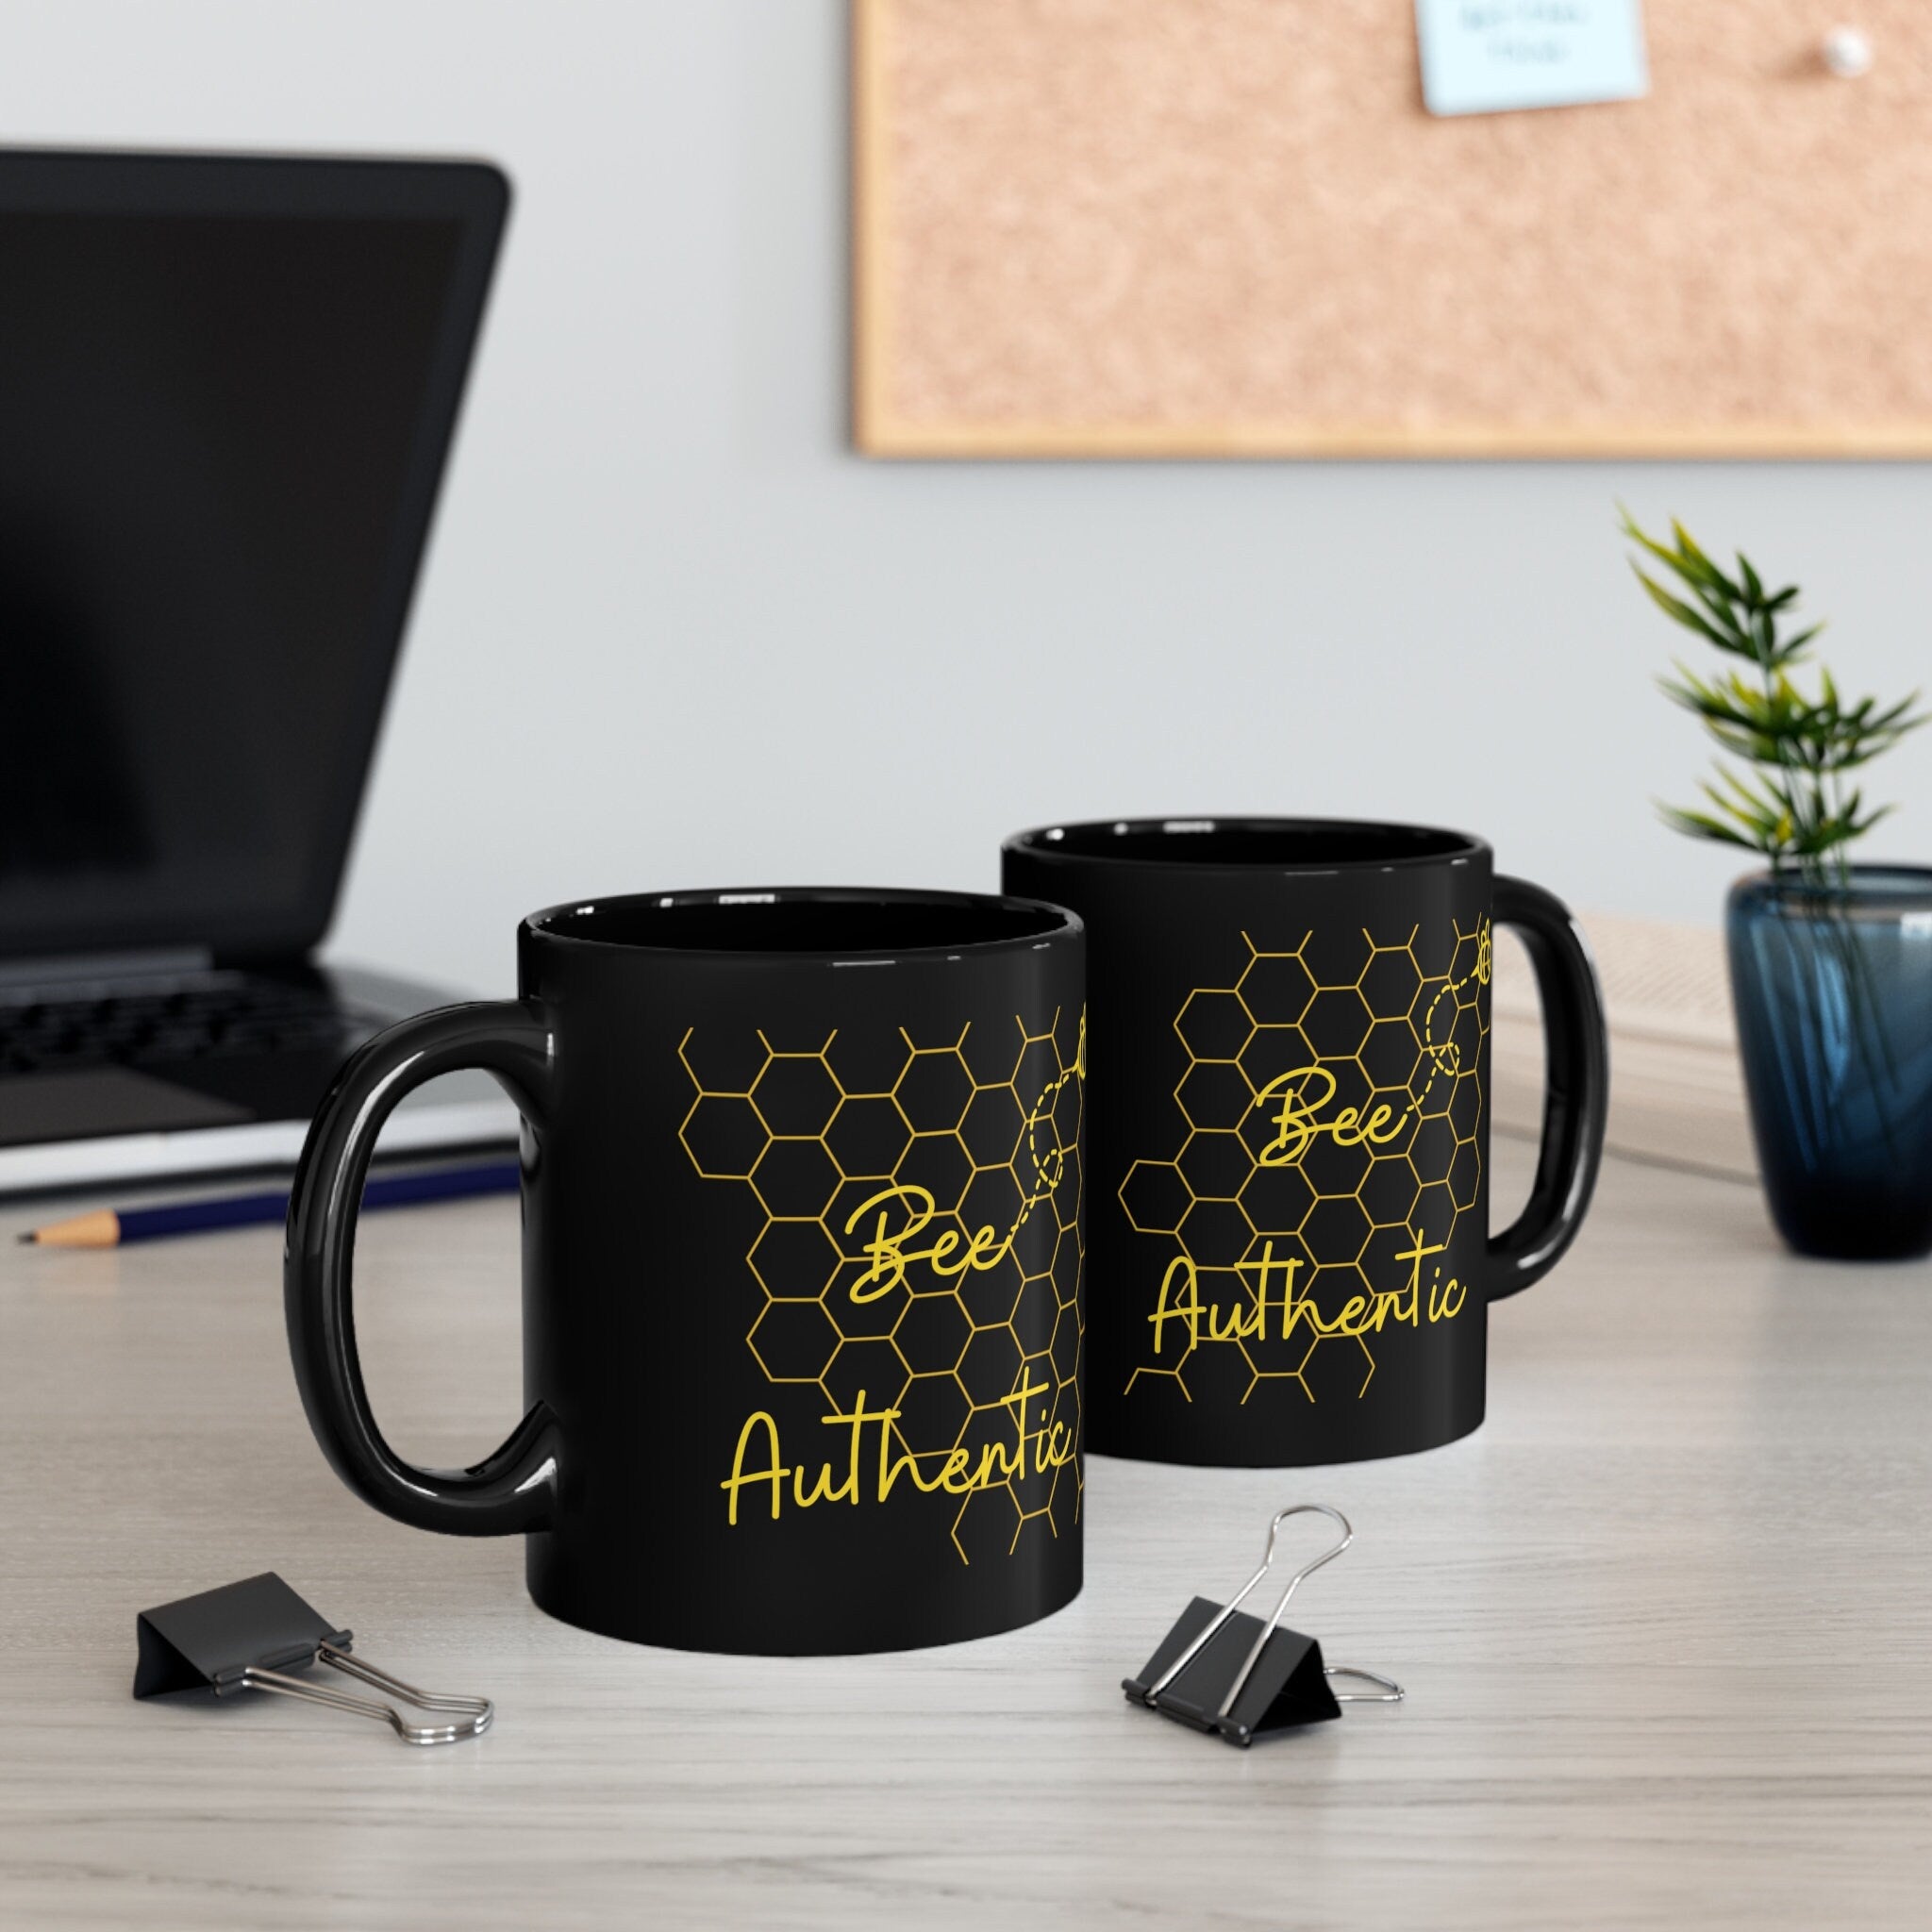 Bee Authentic 11oz Black Mug Self Confidence Inspirational Best Friend Gift Encouraging and Uplifting Coffee Lover